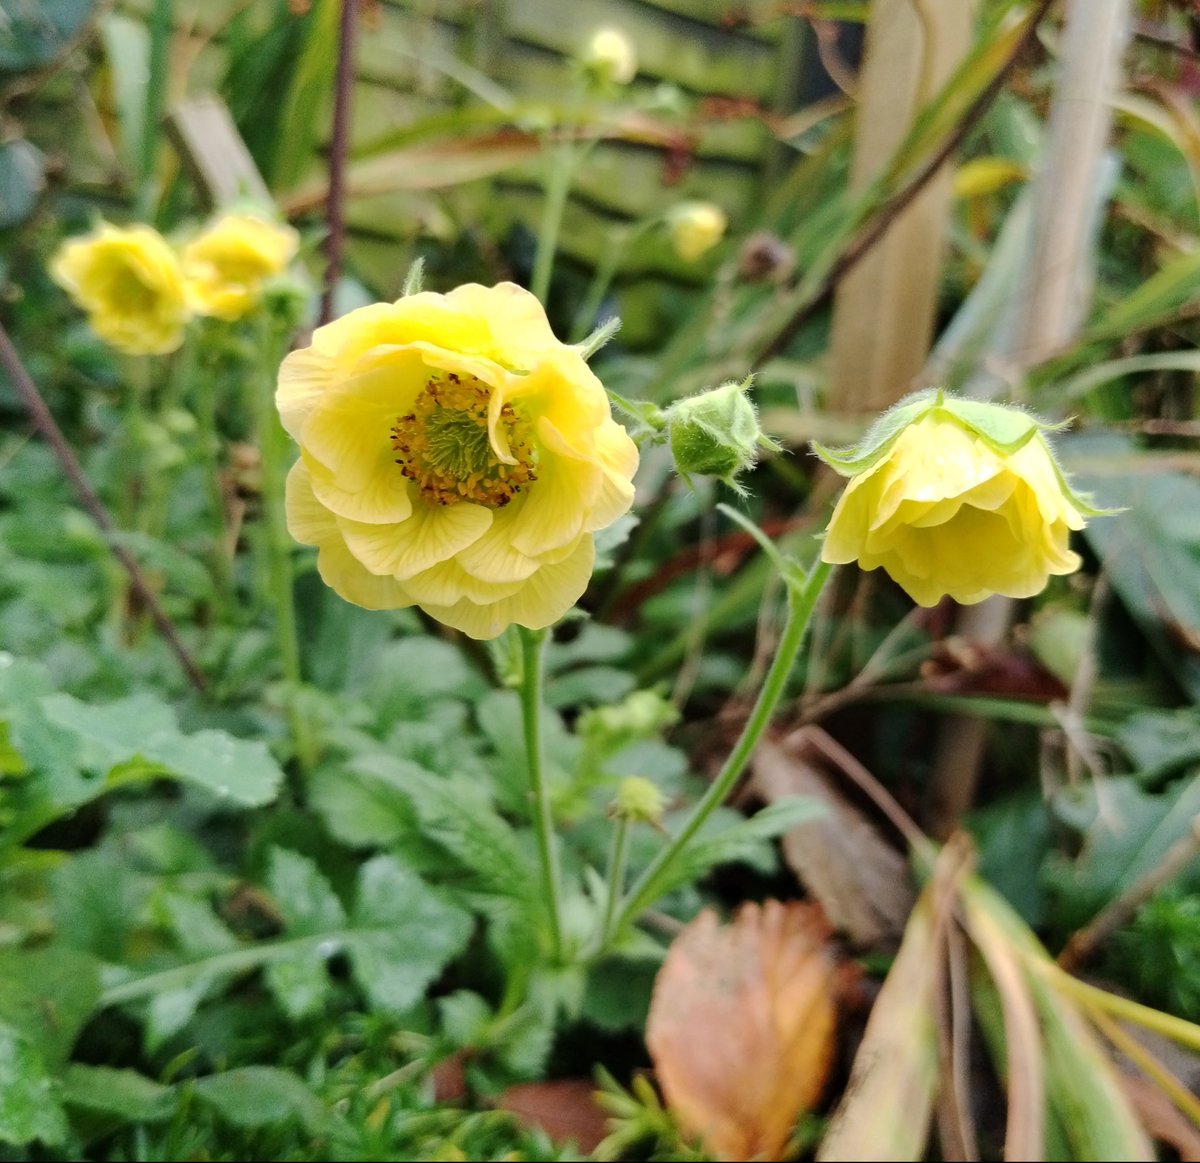 Lots of useful Geum tips in that film. I don't have much luck with them apart from 'Lemon Delight' which flowers for months on end (this photo was taken in mid November) #GardensHour